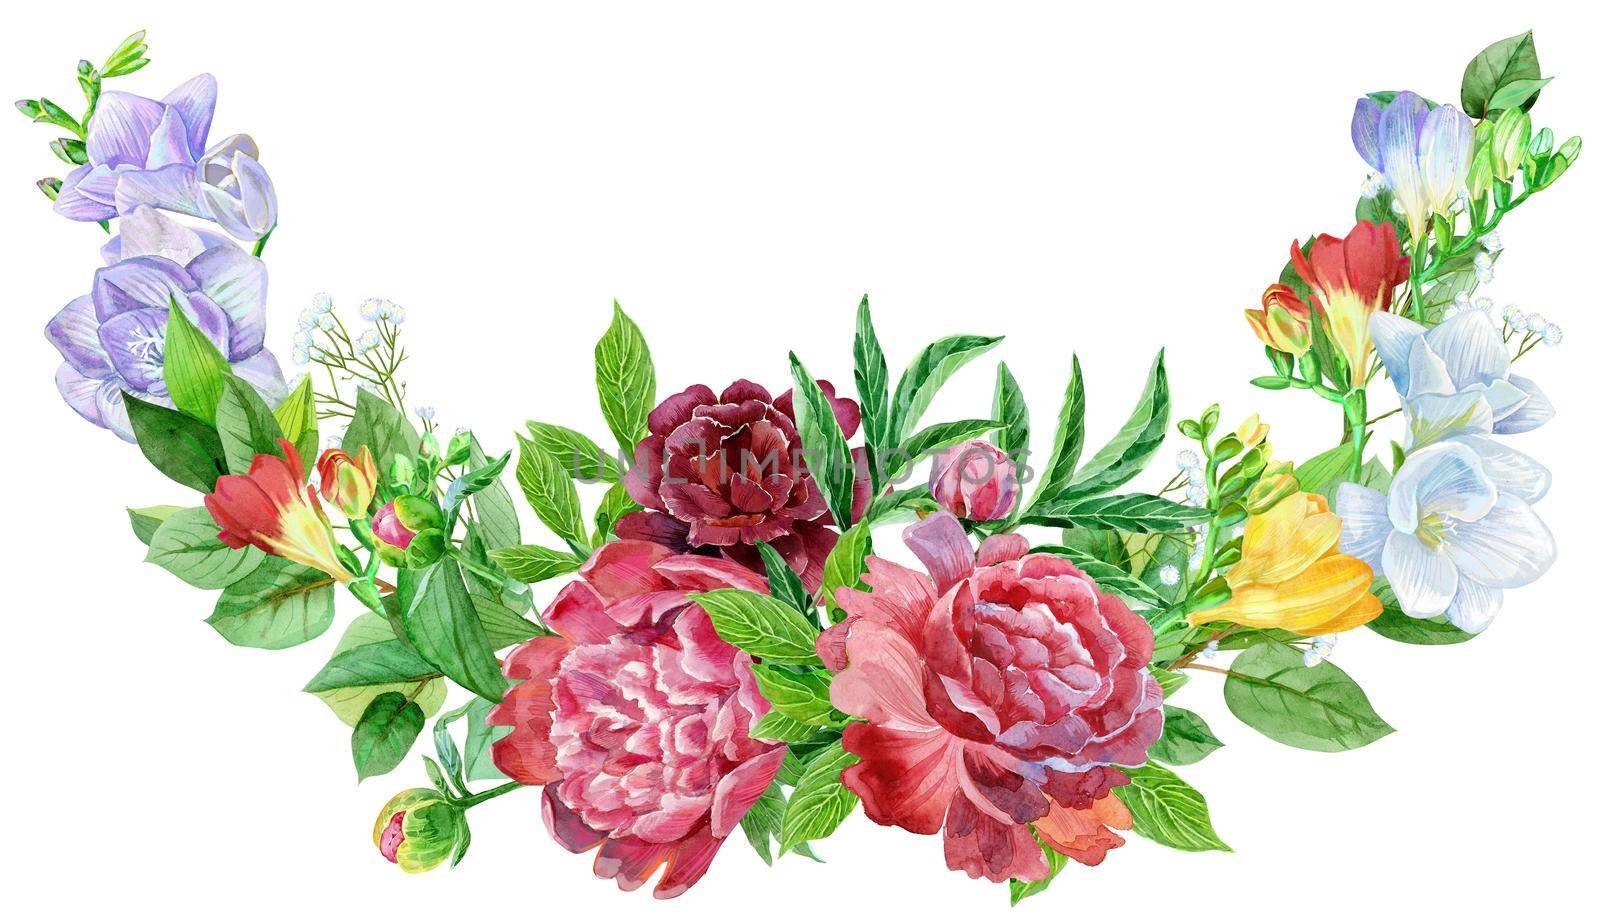 Hand drawnflower border. Design element for wedding invitations, cards. Freesia and peonies